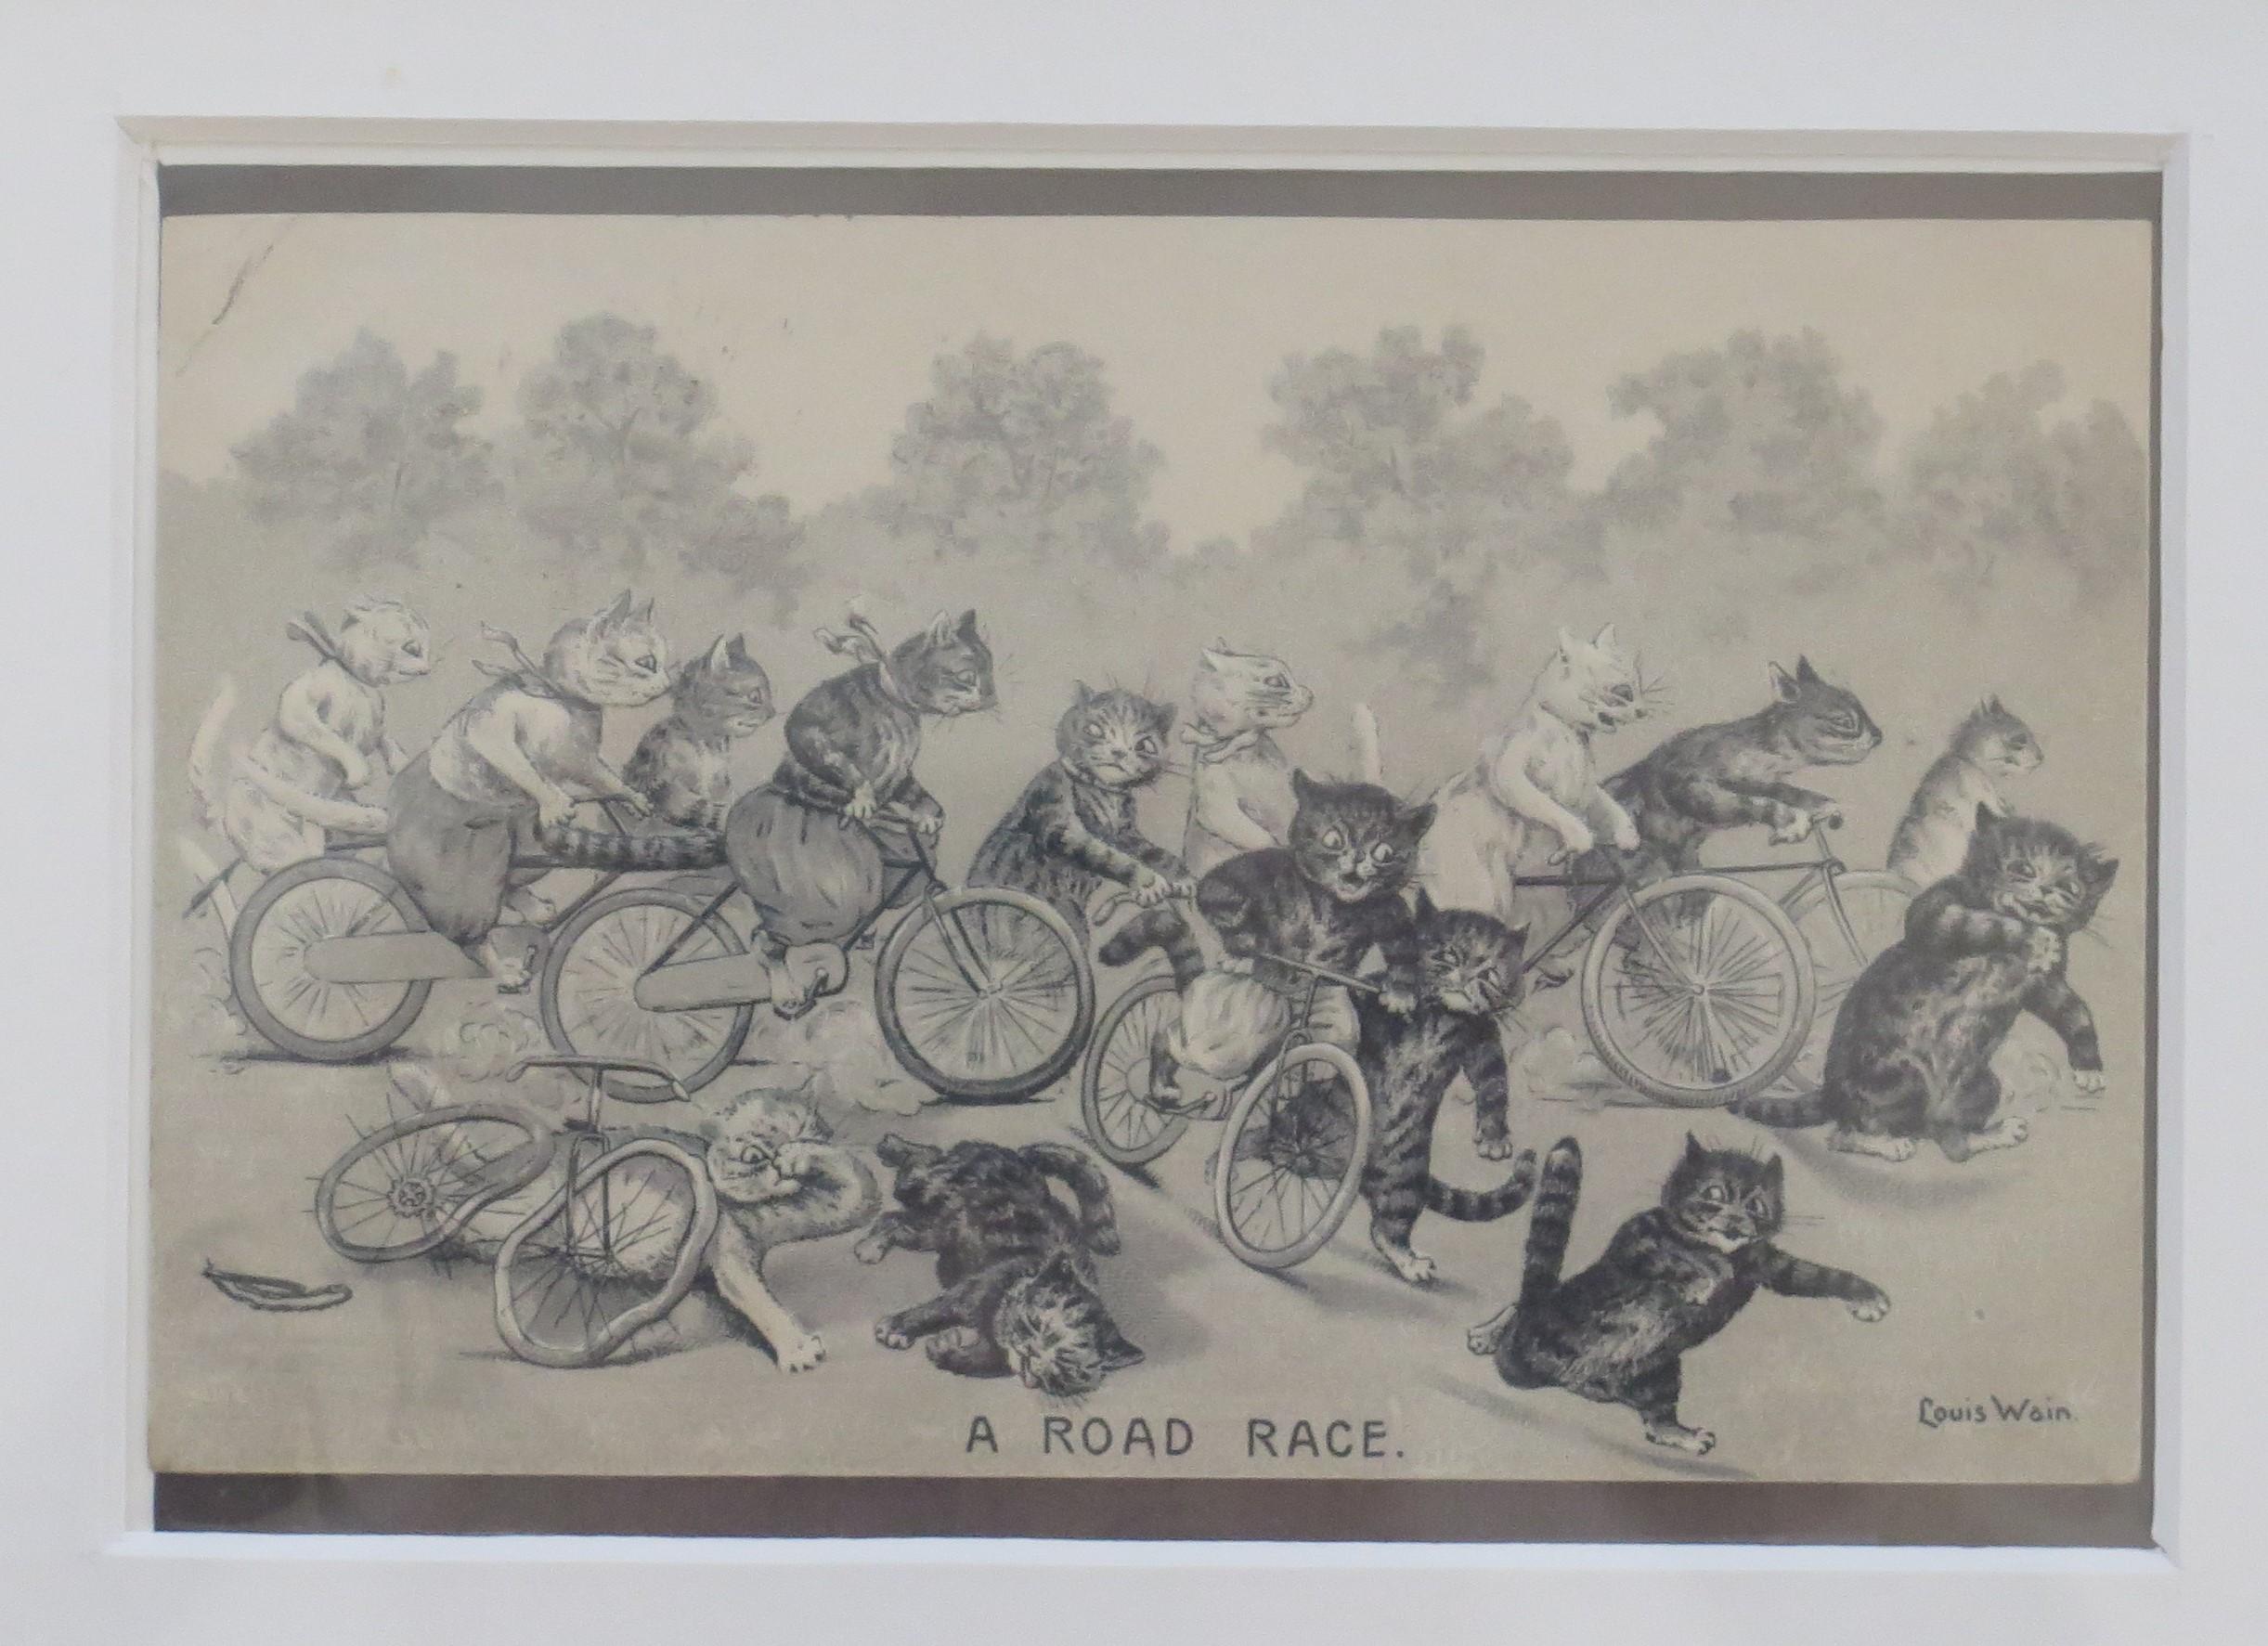 This is a signed cat postcard by Louis Wain, with a cycle racing theme, called 